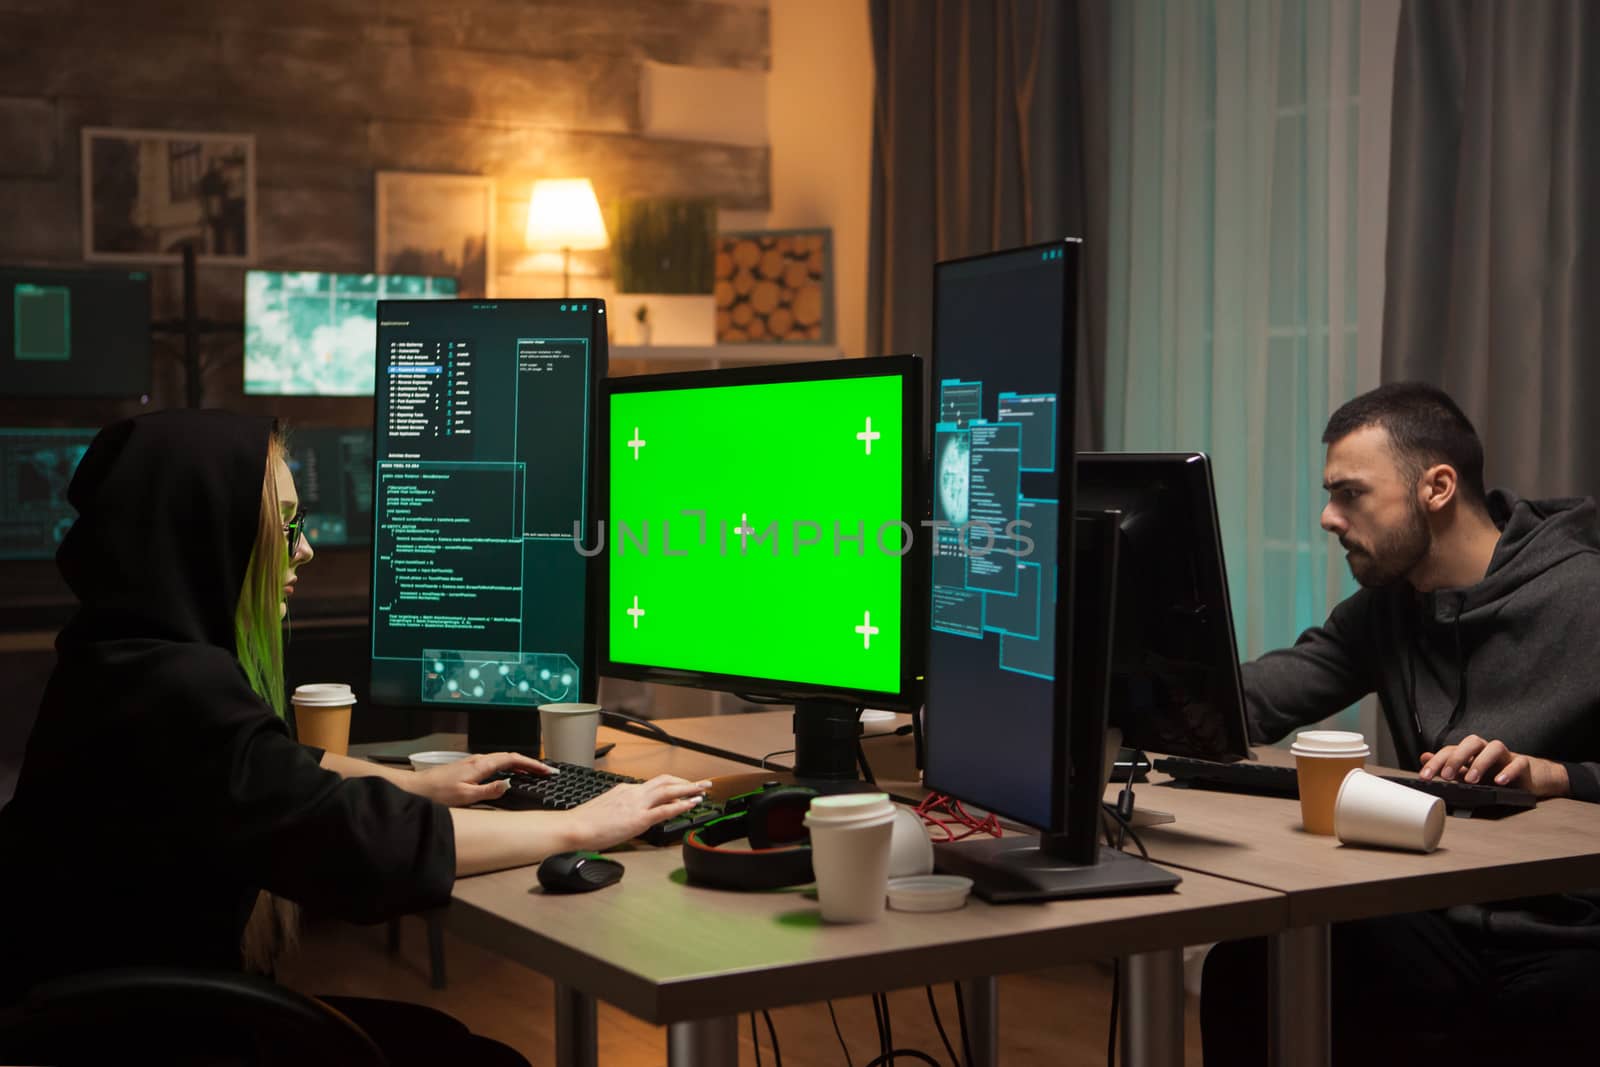 Female hacker with a hoodie in front of computer with green screen and male criminal.